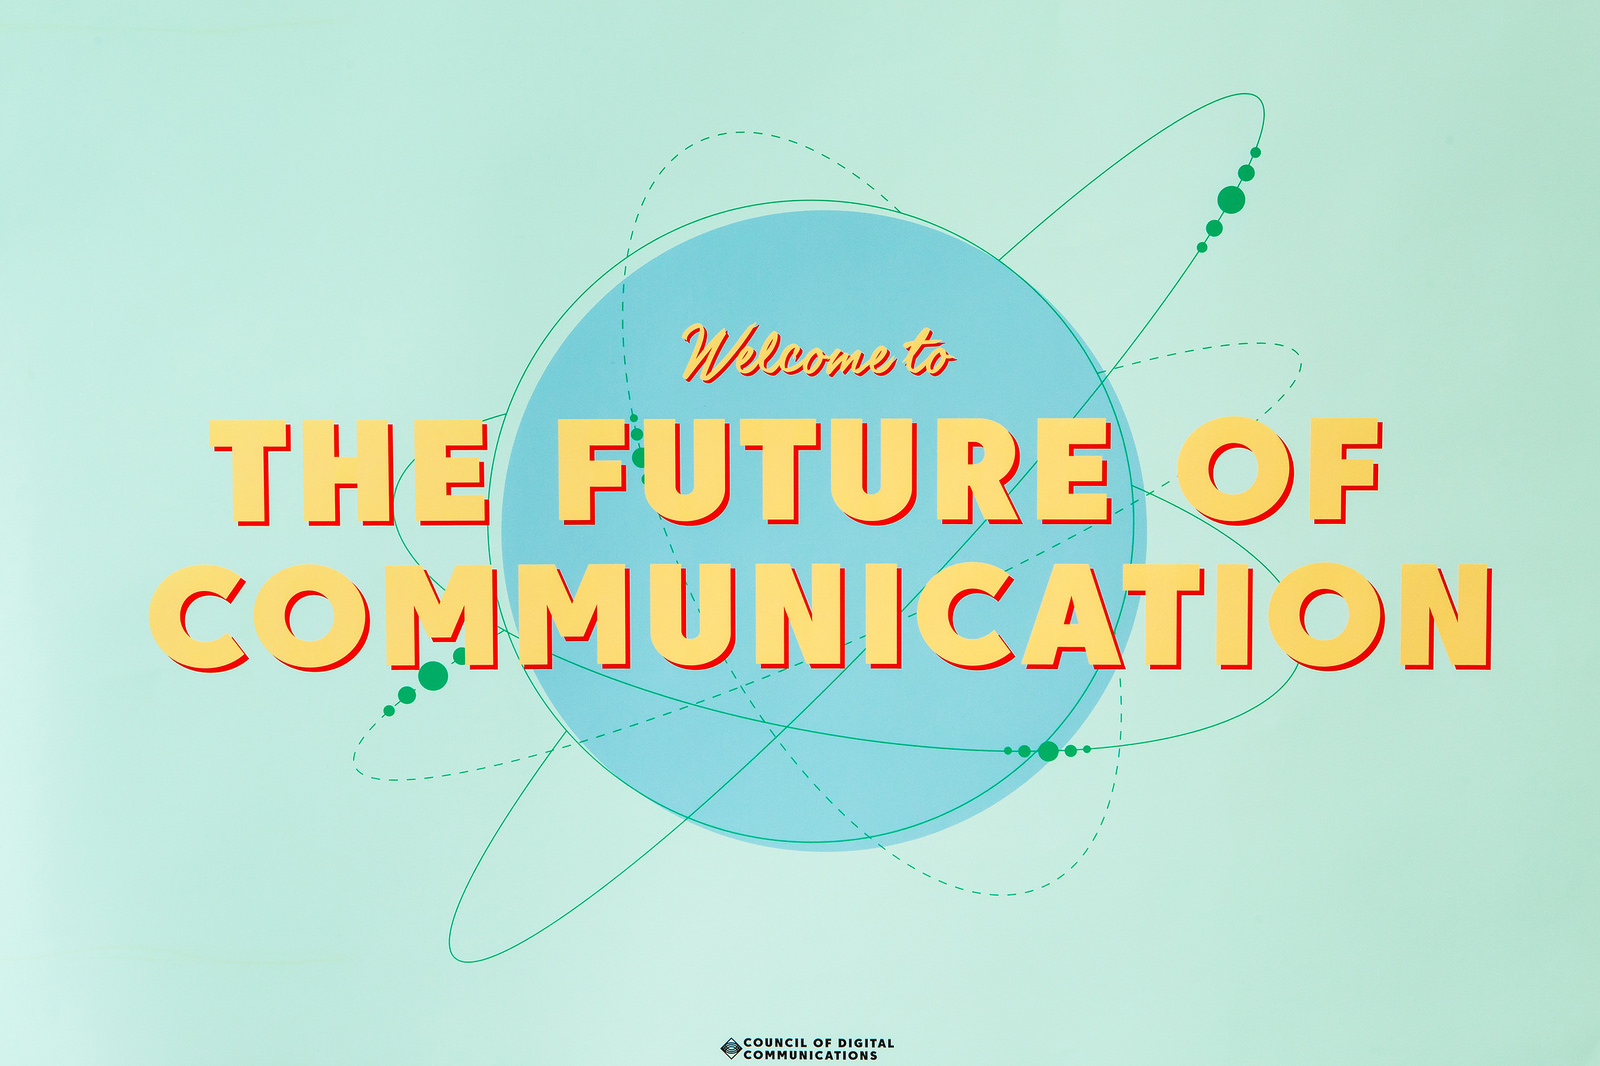 The Future of Communication